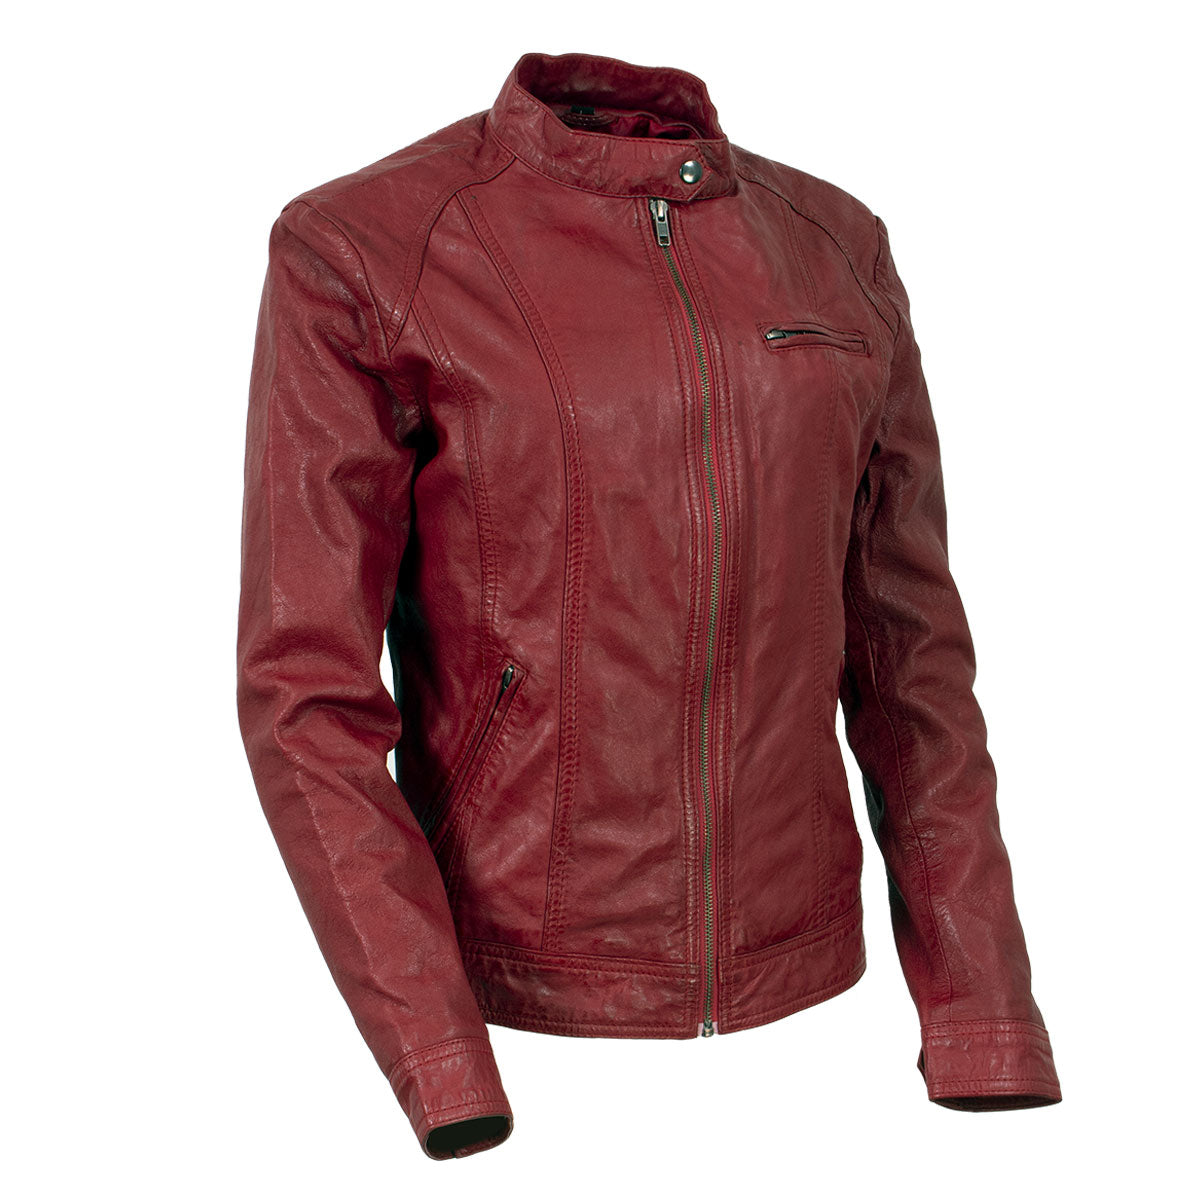 Milwaukee Leather Vintage SFL2811 Women's Red Zipper Front Motorcycle Casual Fashion Leather Jacket